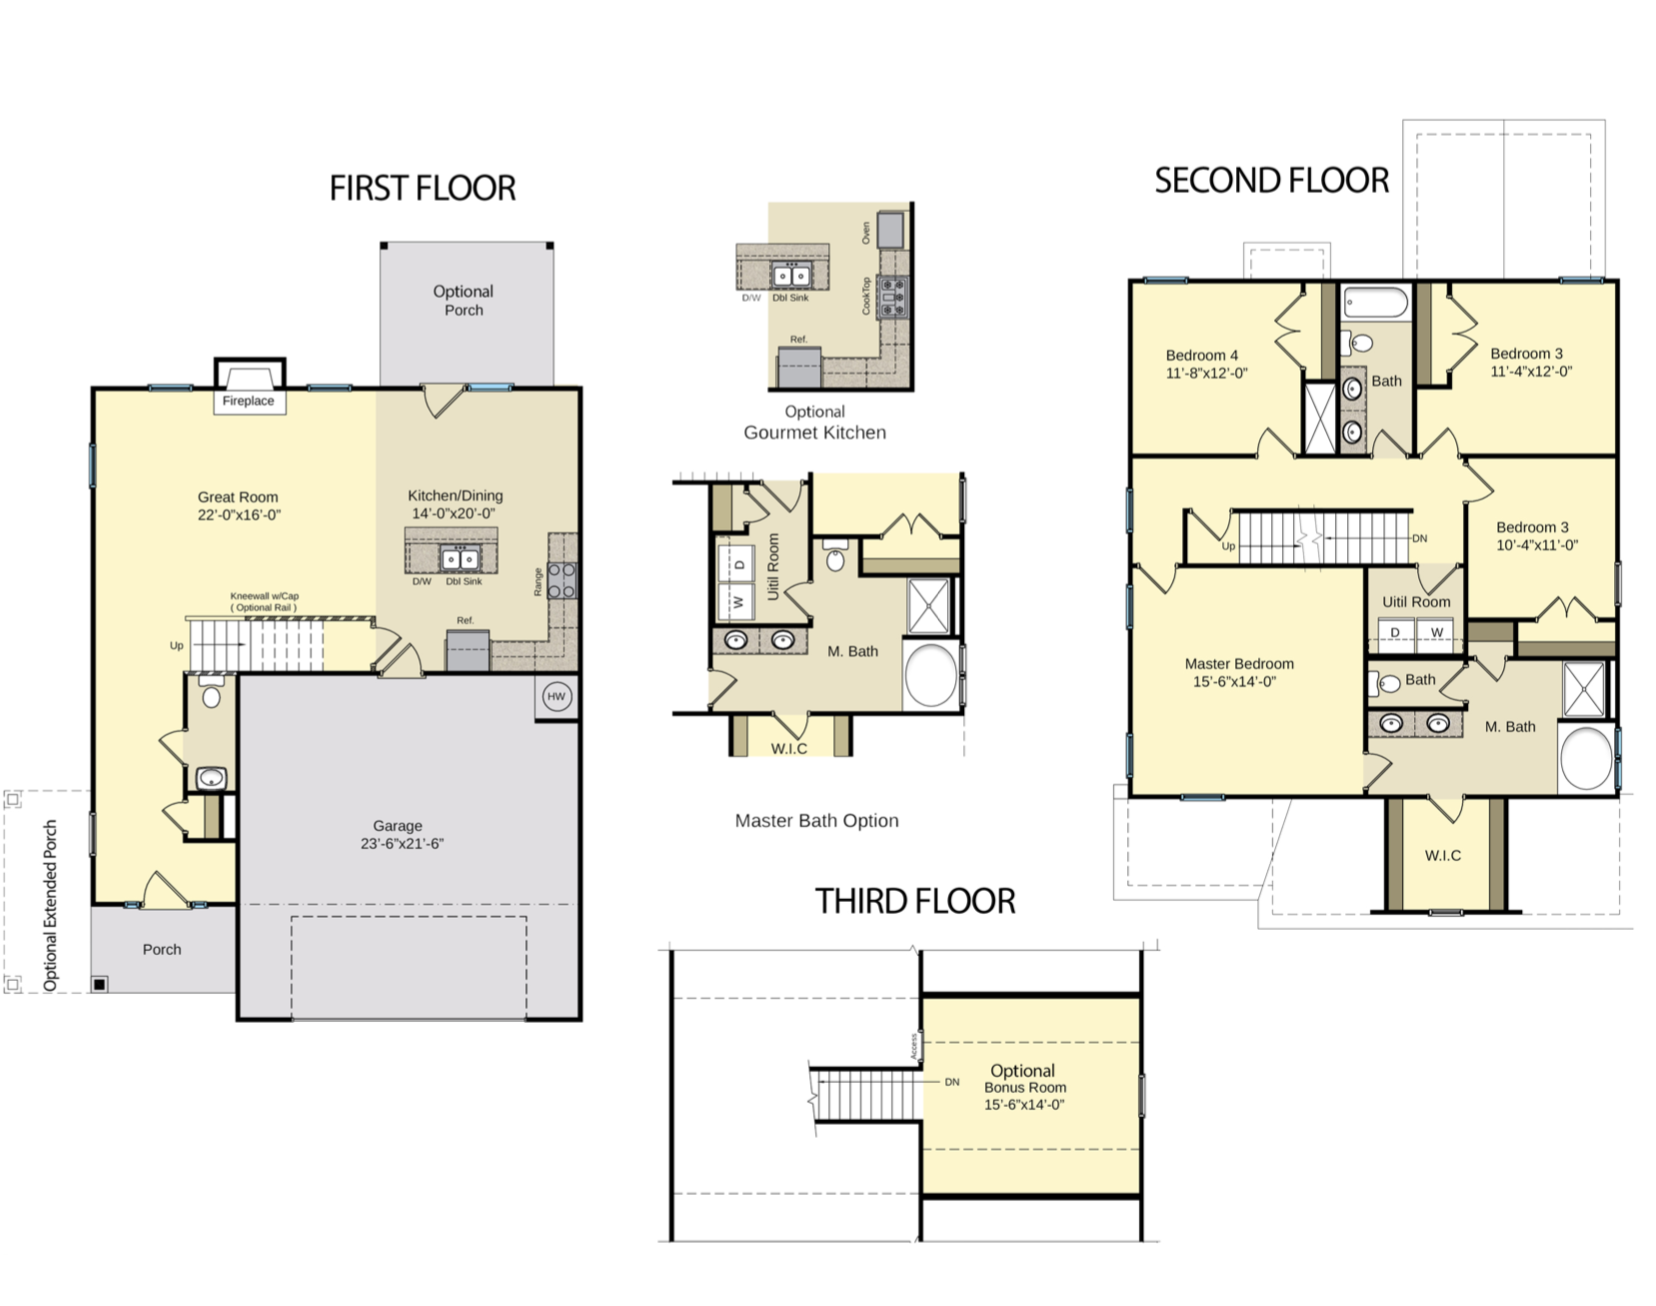 The Bailey Caviness & Cates floor plan image